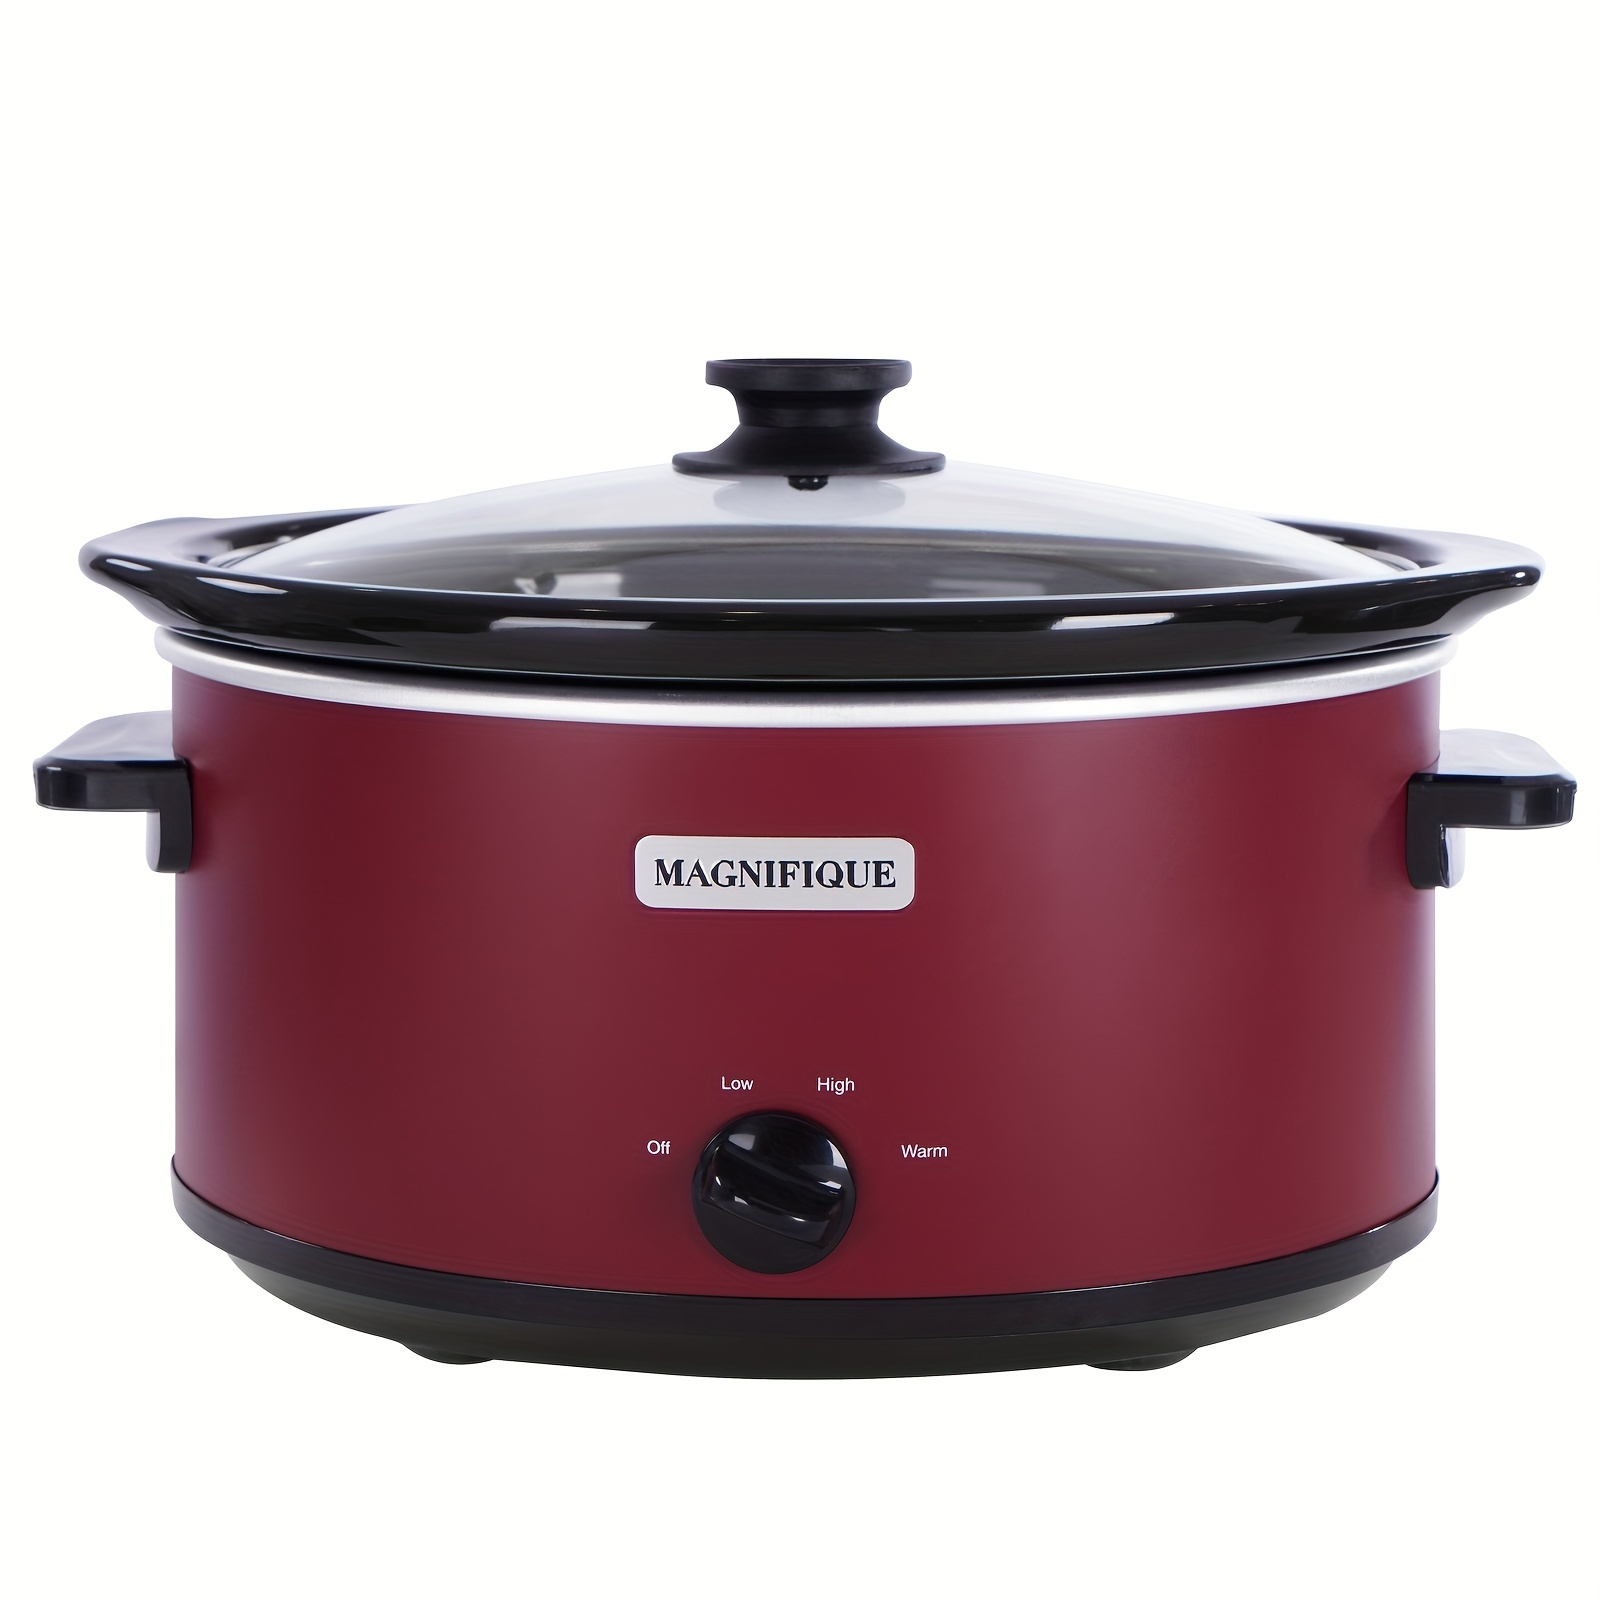 

Magnifique 8 Quart Slow Cooker Oval Manual Pot Food Warmer With 3 Cooking Settings, Red Stainless Steel